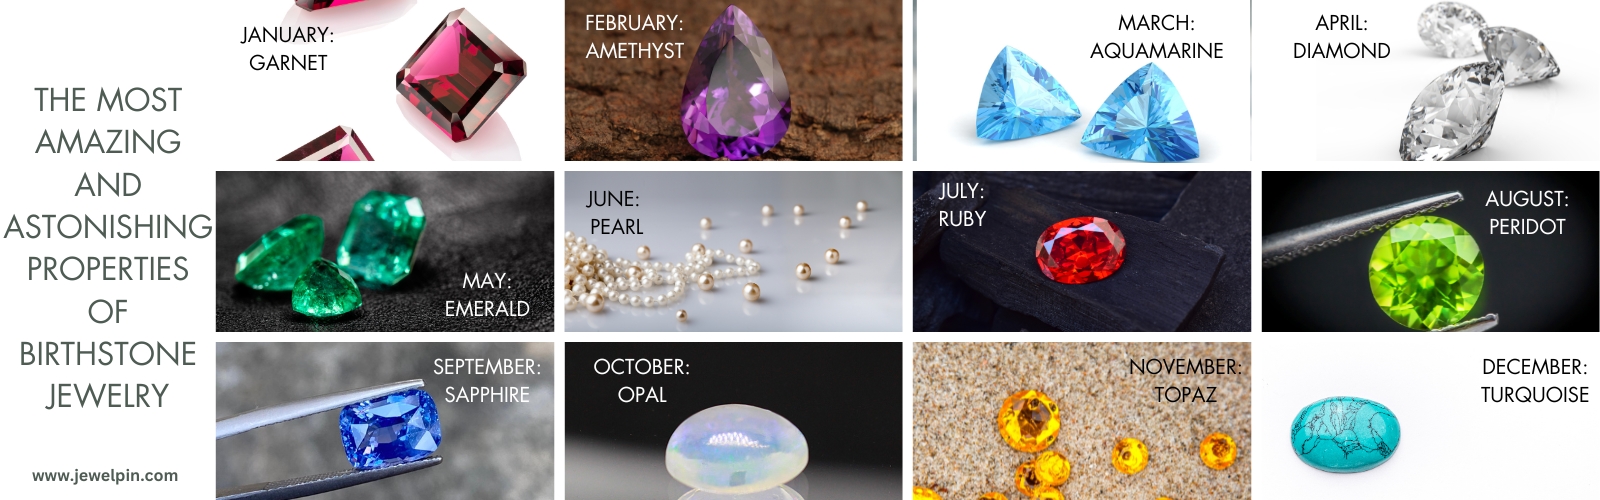 the most amazing and astonishing properties of birthstone jewelry